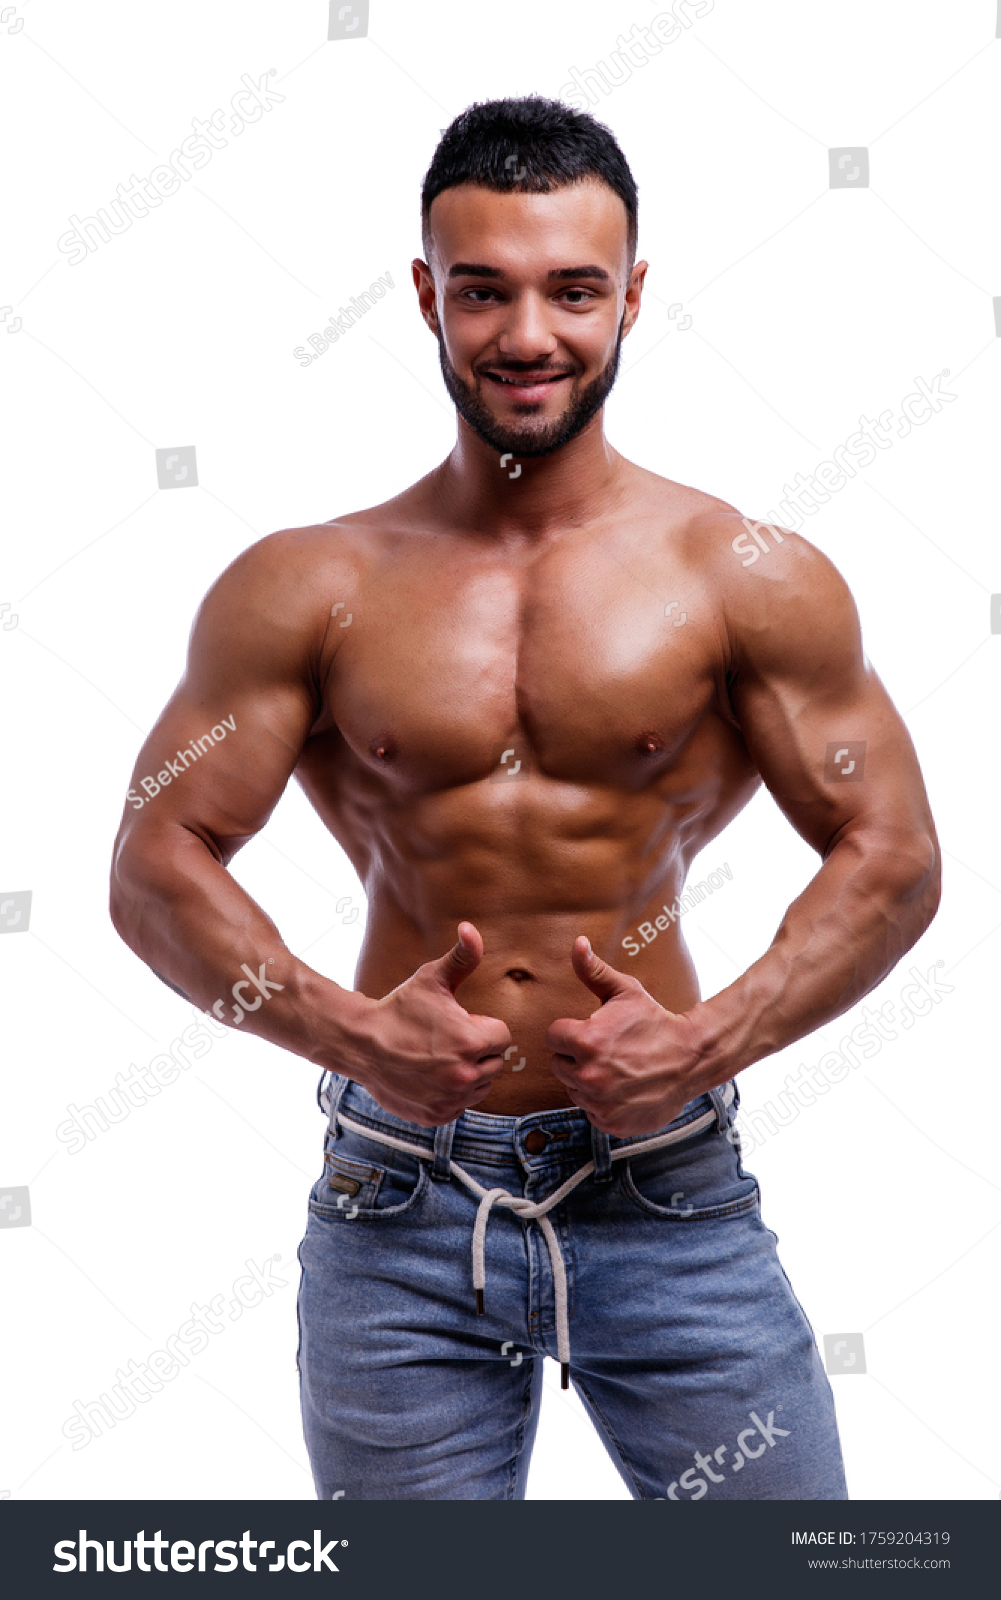 Muscular Man Without Shirt Photo Handsome Stock Photo 1759204319 ...